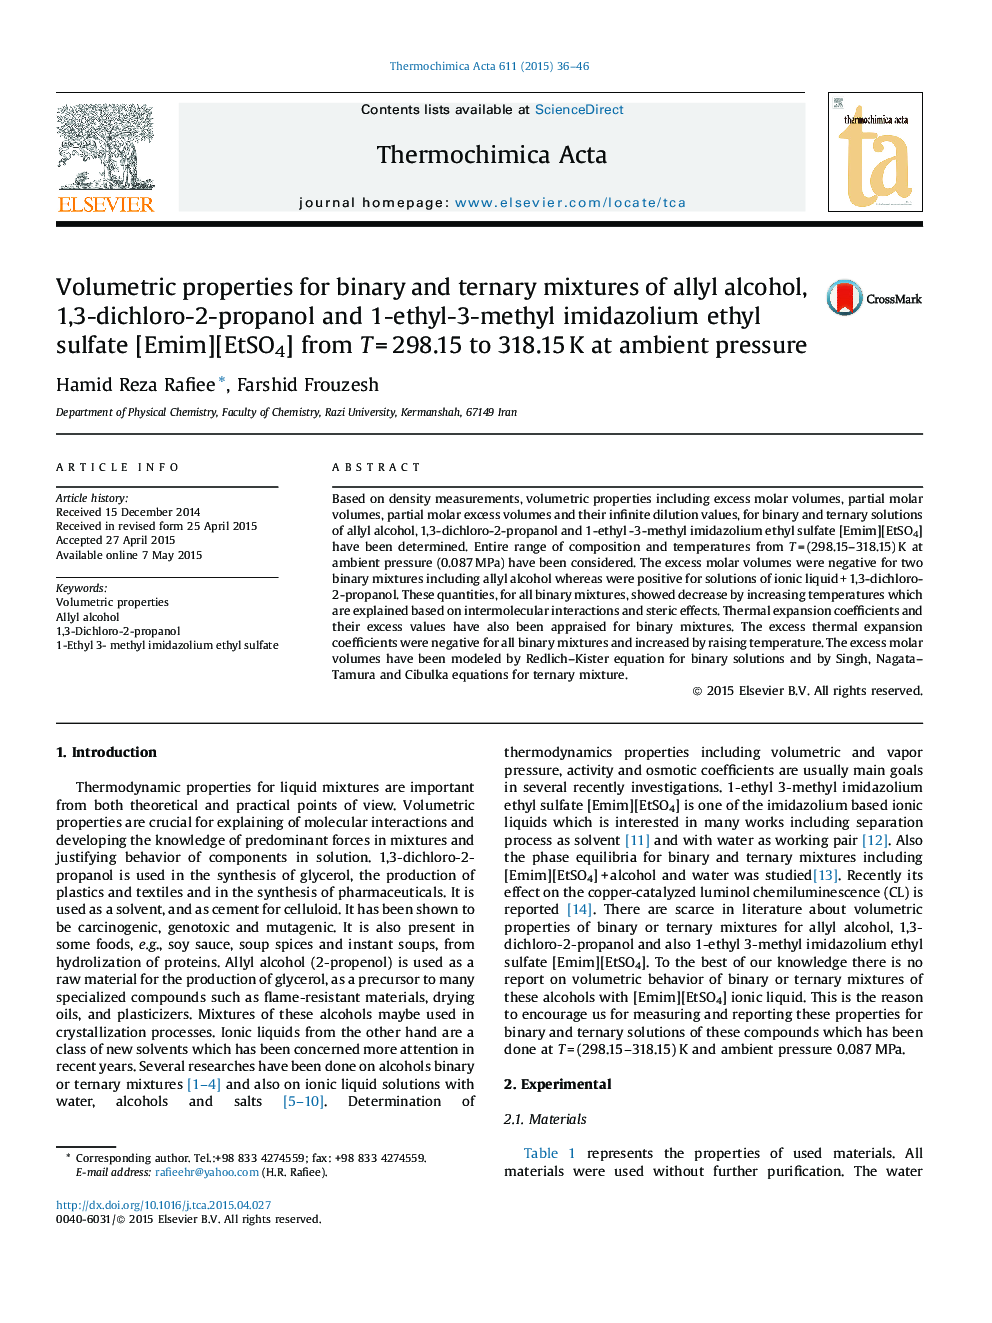 Volumetric properties for binary and ternary mixtures of allyl alcohol, 1,3-dichloro-2-propanol and 1-ethyl-3-methyl imidazolium ethyl sulfate [Emim][EtSO4] from T = 298.15 to 318.15 K at ambient pressure